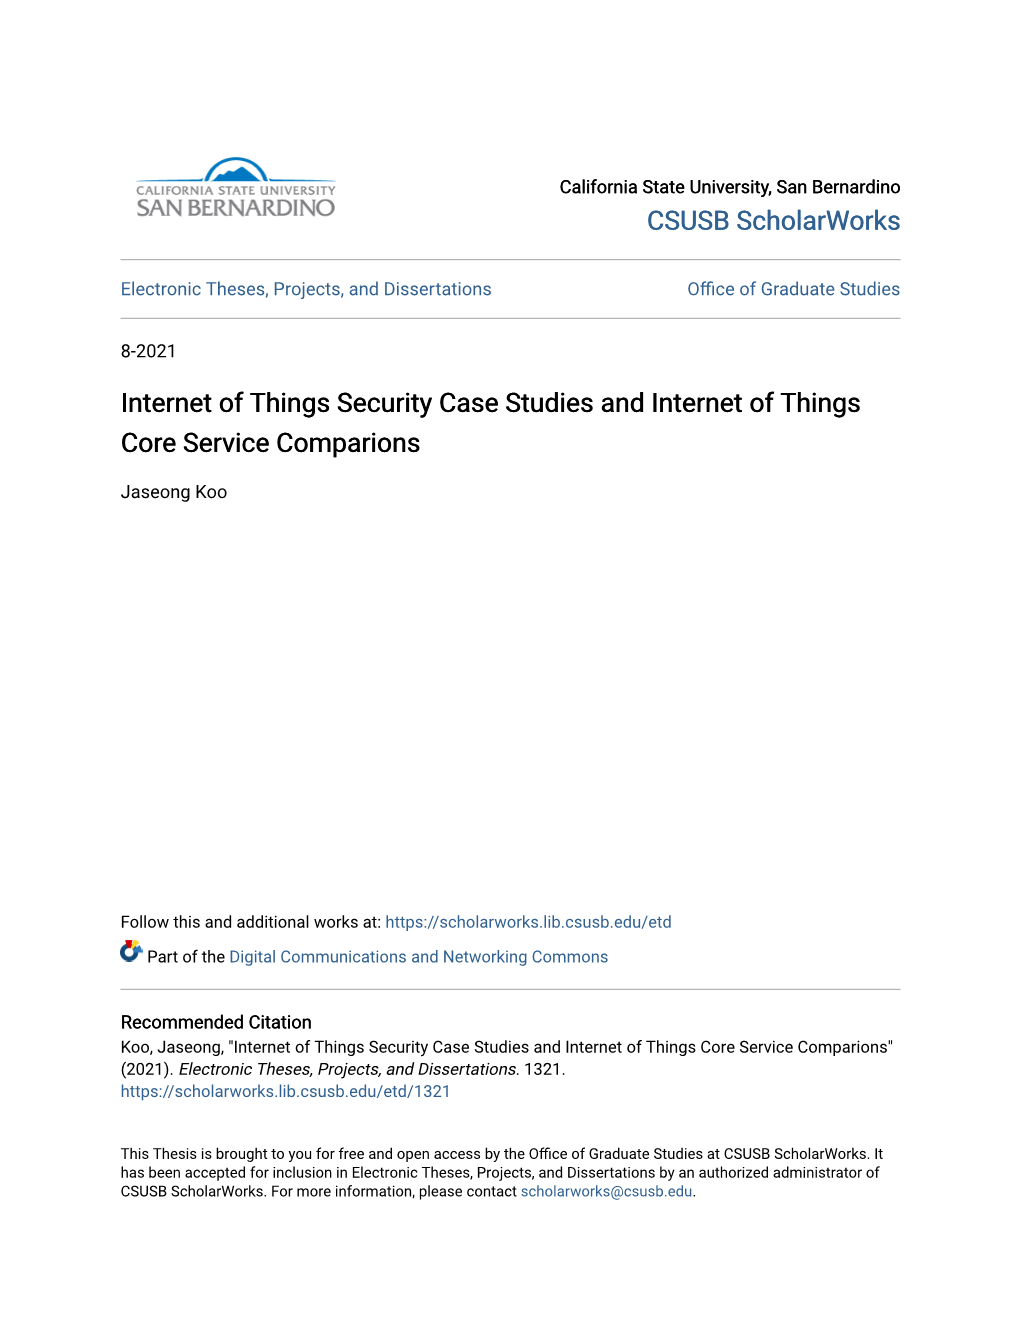 Internet of Things Security Case Studies and Internet of Things Core Service Comparions